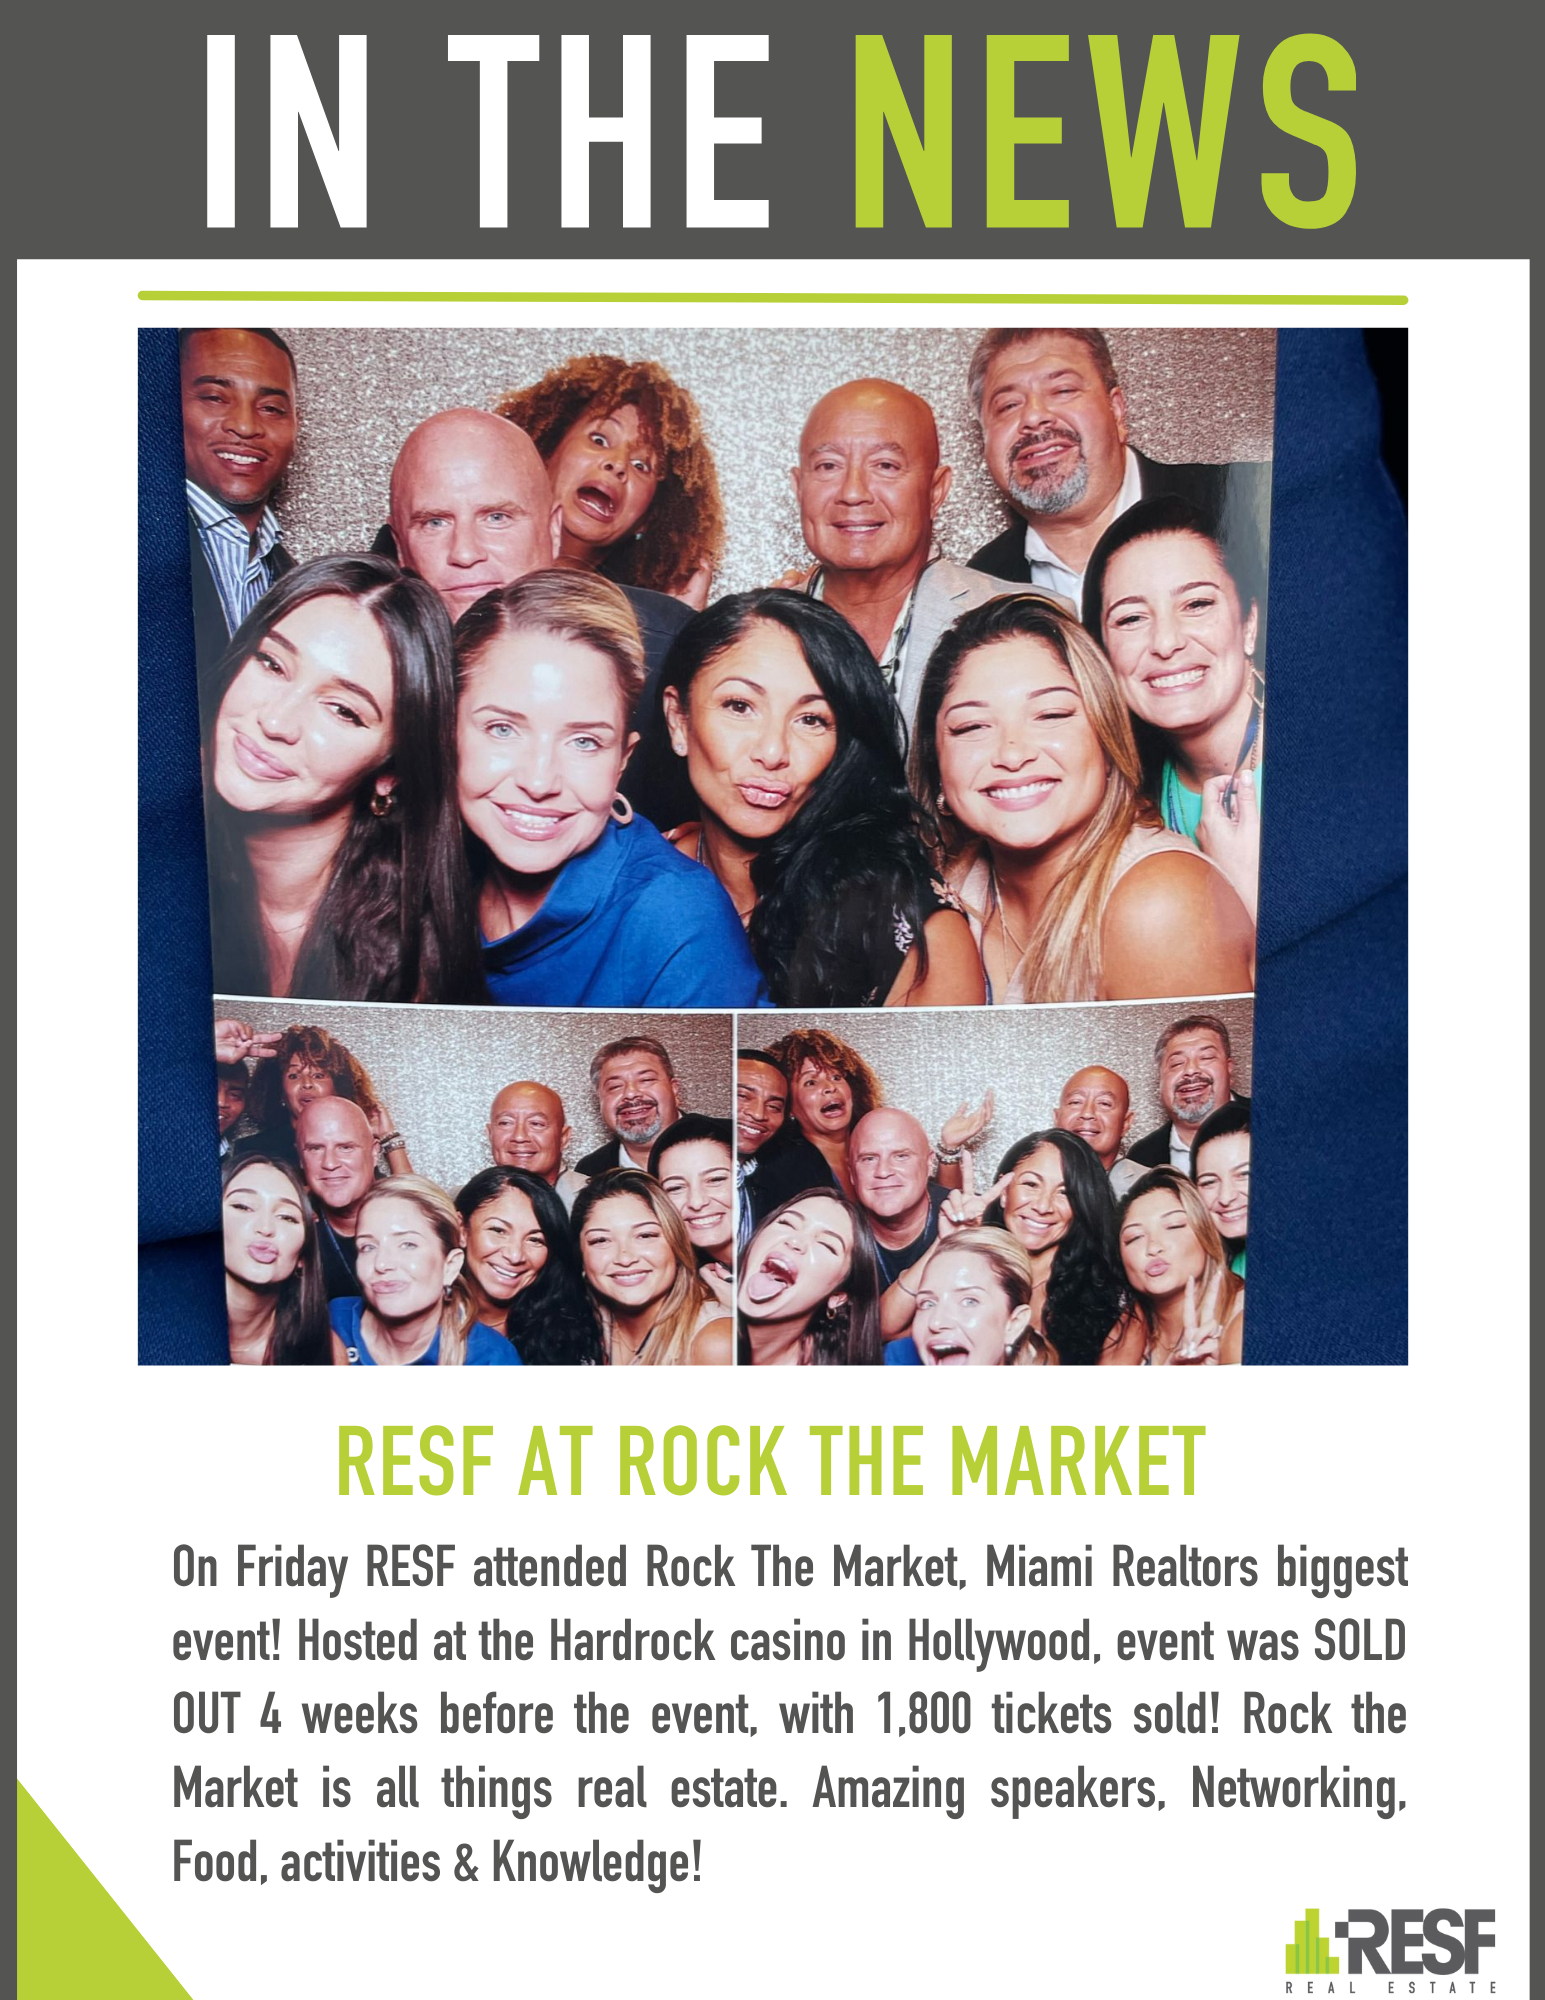 RESF at Rock the Market